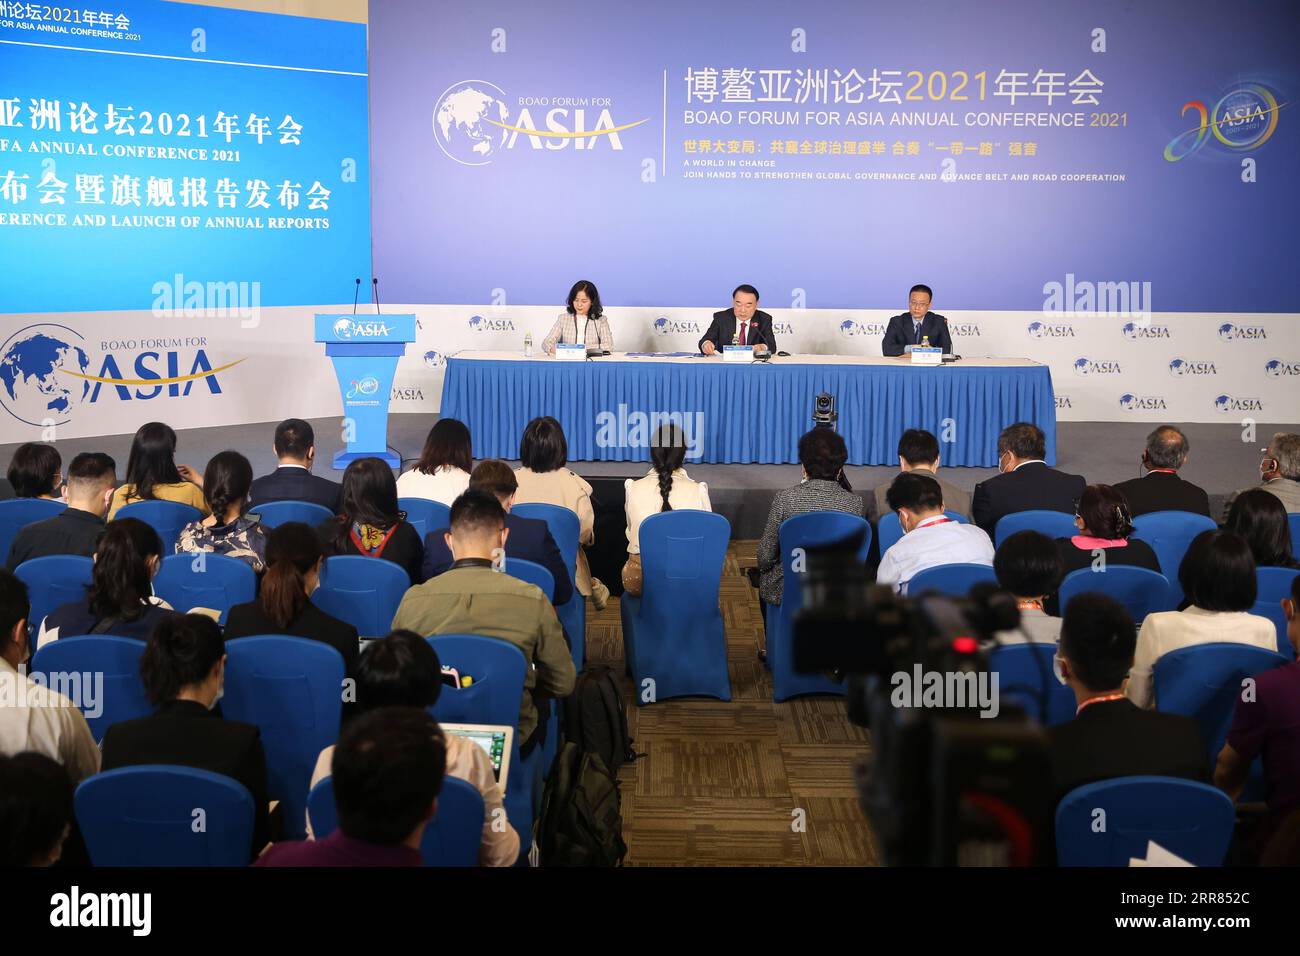 210418 -- BOAO, April 18, 2021 -- Photo taken on April 18, 2021 shows the press conference of the 2021 Boao Forum for Asia BFA annual conference and the launch of annual reports in Boao Town, south China s Hainan Province. Over 2,600 delegates, including government officials, entrepreneurs and scholars from over 60 countries and regions are expected to attend the 2021 BFA annual conference in person. Approximately 1,200 journalists from 160 media organizations in 18 countries and regions will attend the conference.  CHINA-HAINAN-BFA ANNUAL CONFERENCE CN ZhangxLiyun PUBLICATIONxNOTxINxCHN Stock Photo